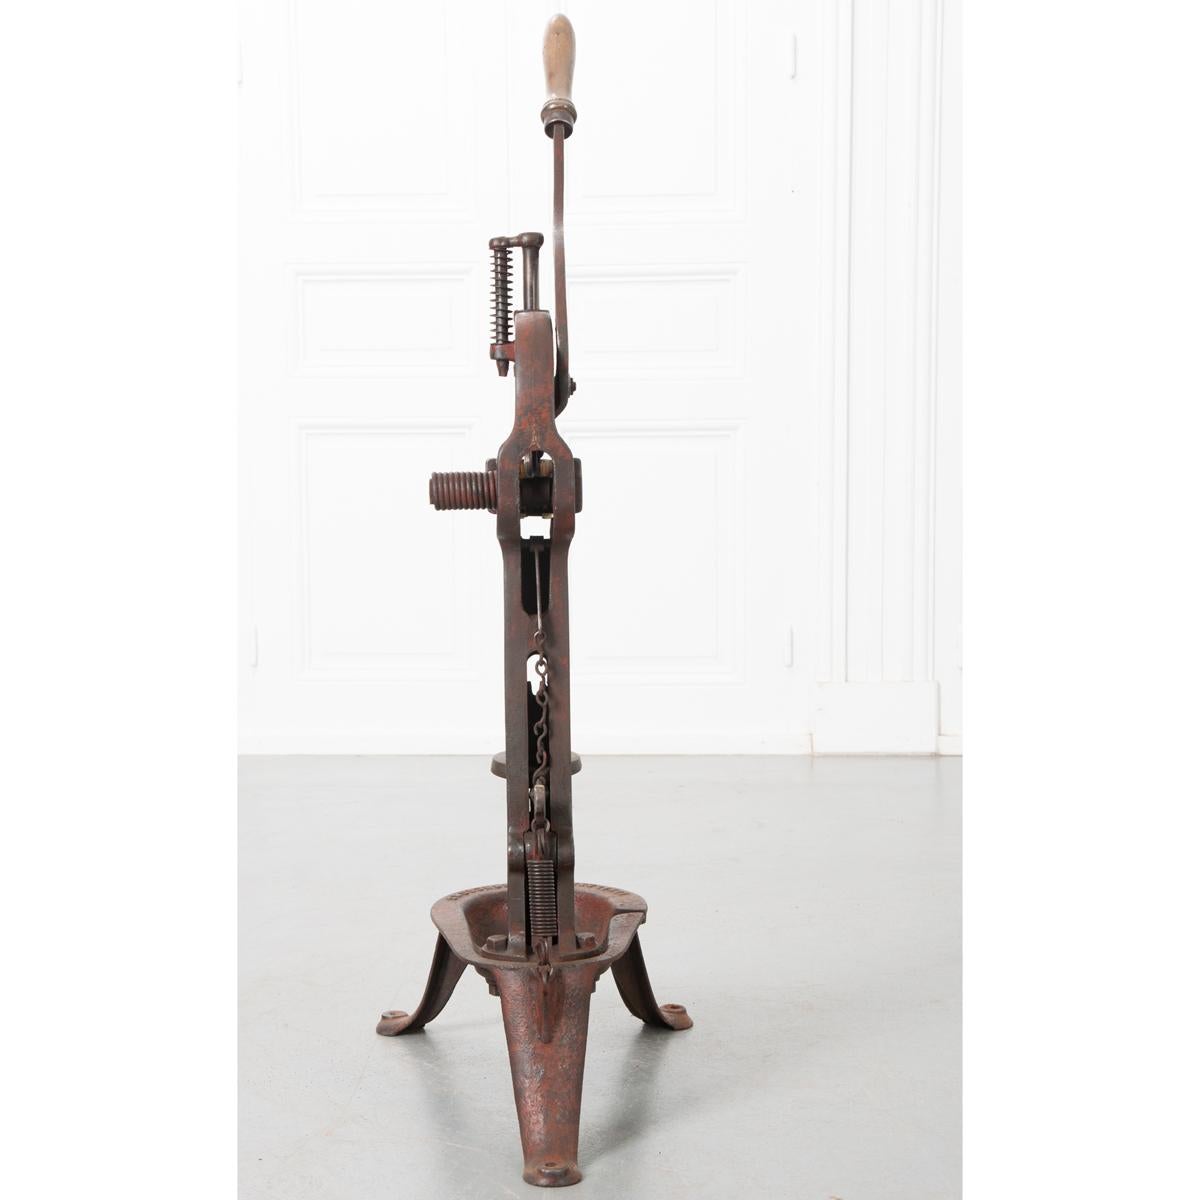 This unique apparatus has a lot to do with the history and shaping of French history and culture: the wine bottle corker. Made of iron around 1890, was used in a winery in Bordeaux. On one side is printed “LA MEILLEUAE B” and also B.F Paris. The